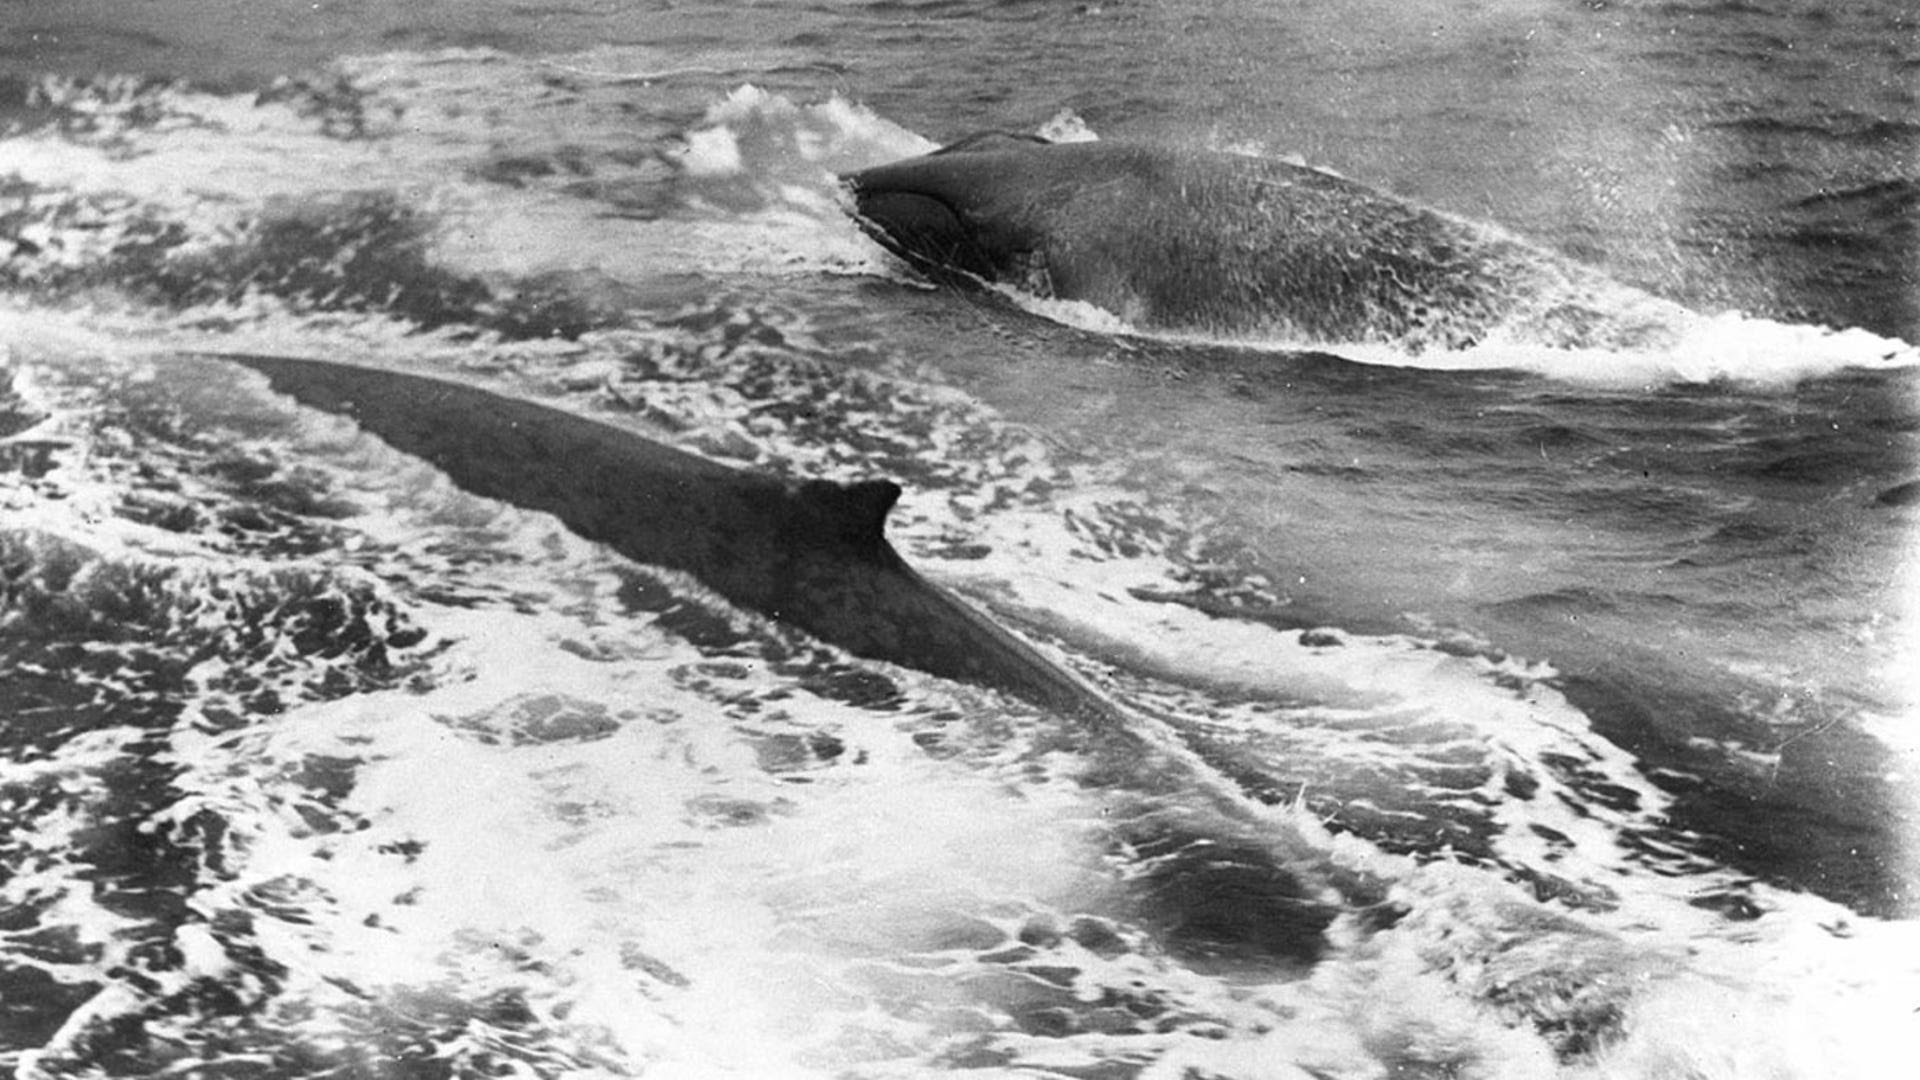 Two whales breaching, in black and white